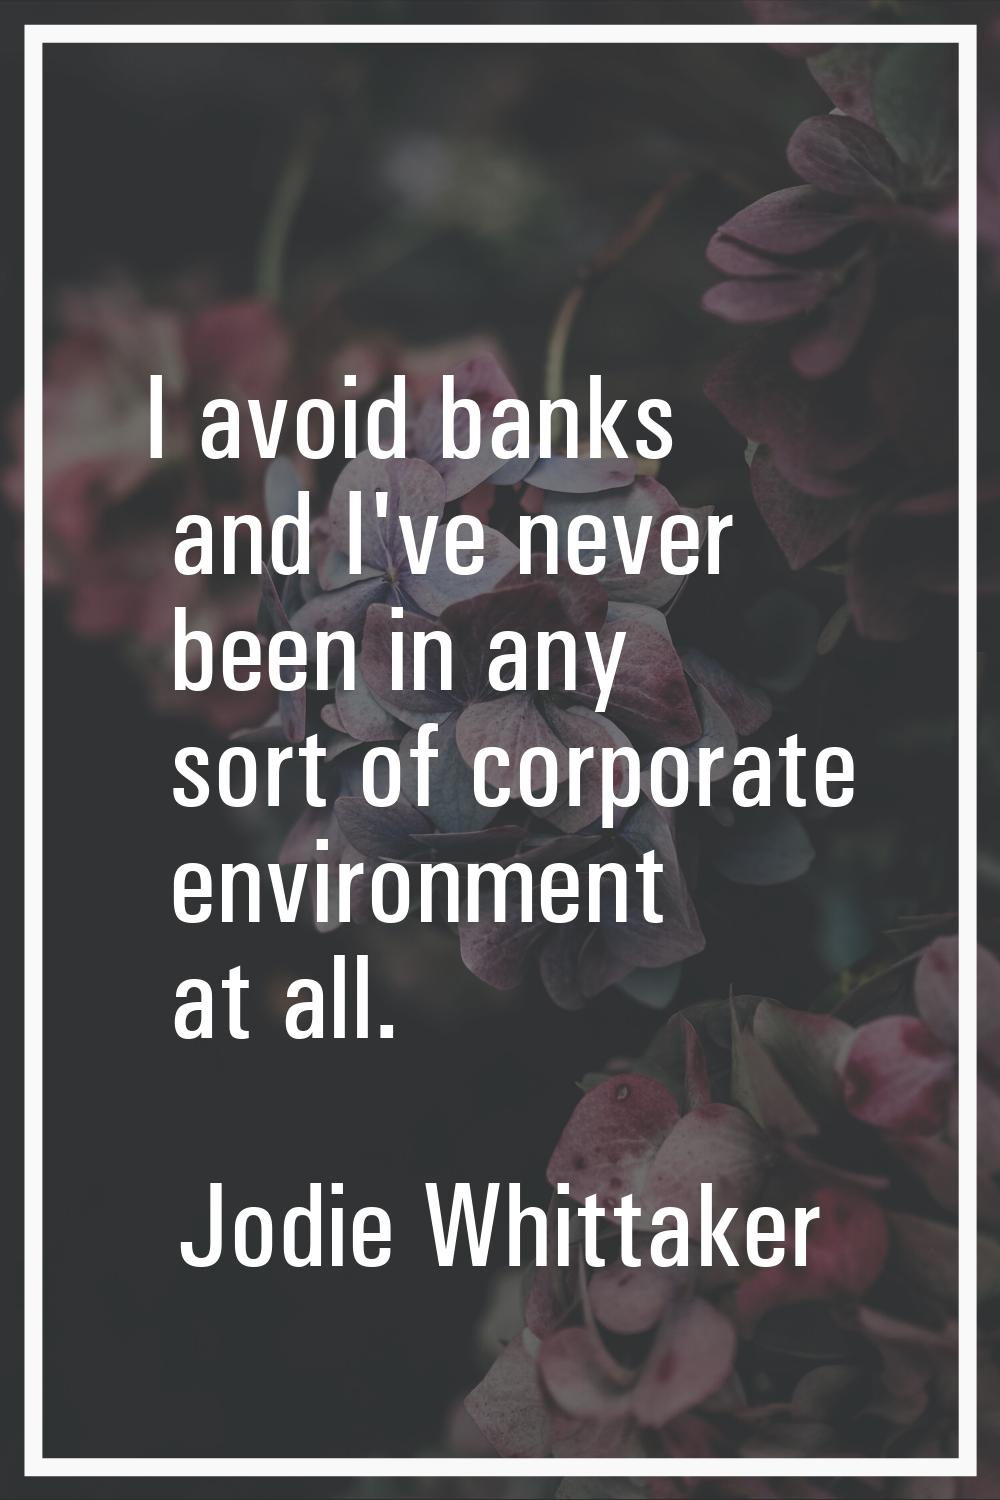 I avoid banks and I've never been in any sort of corporate environment at all.